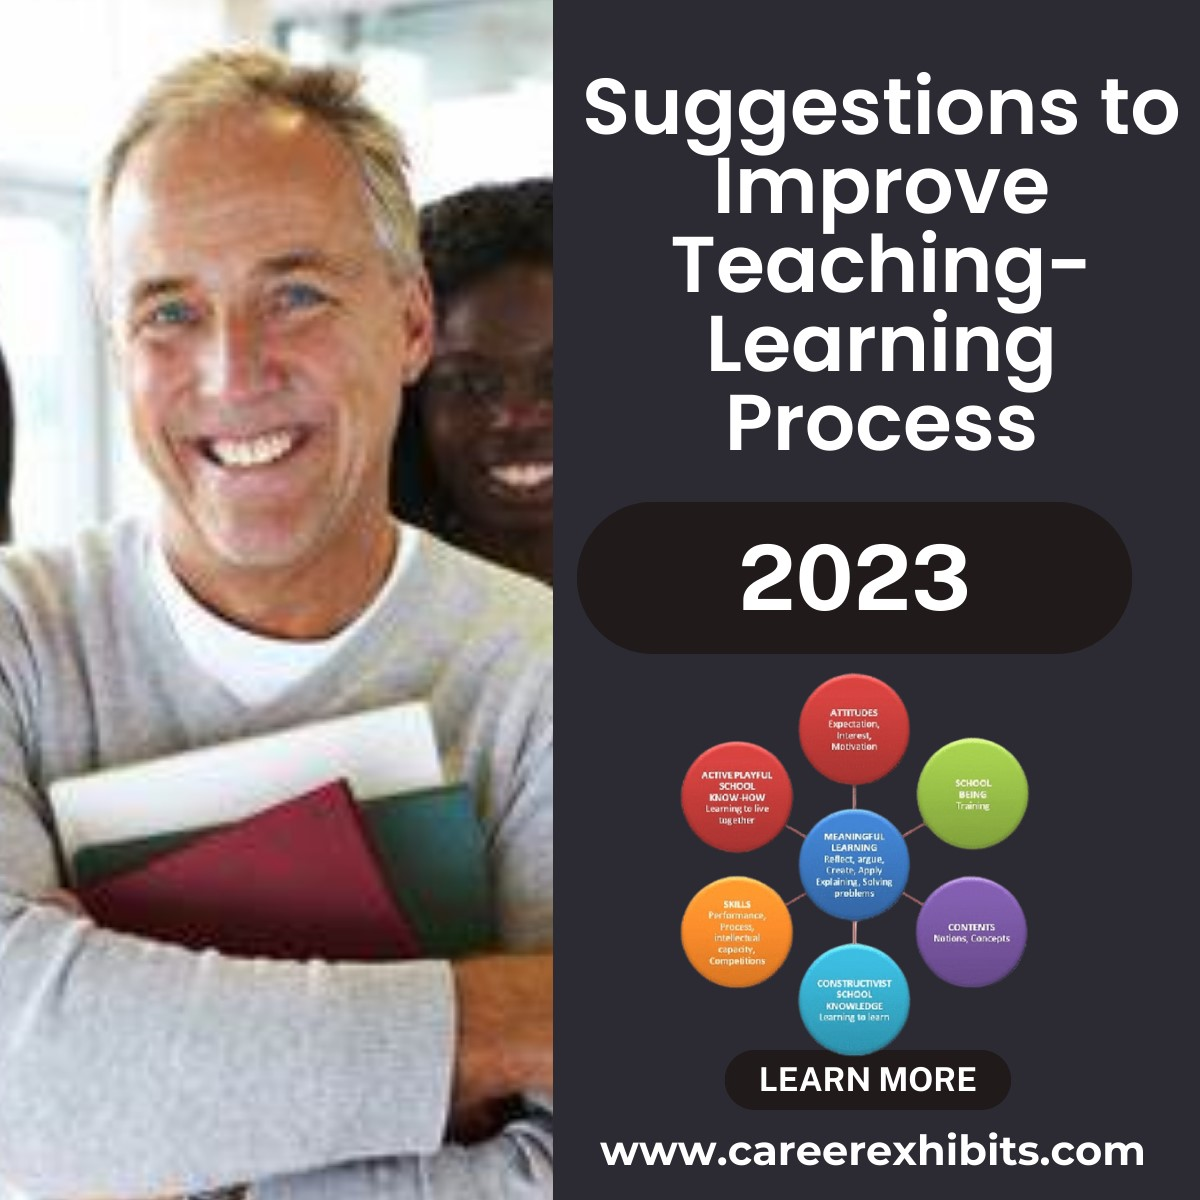 suggestions to improve teaching-learning process